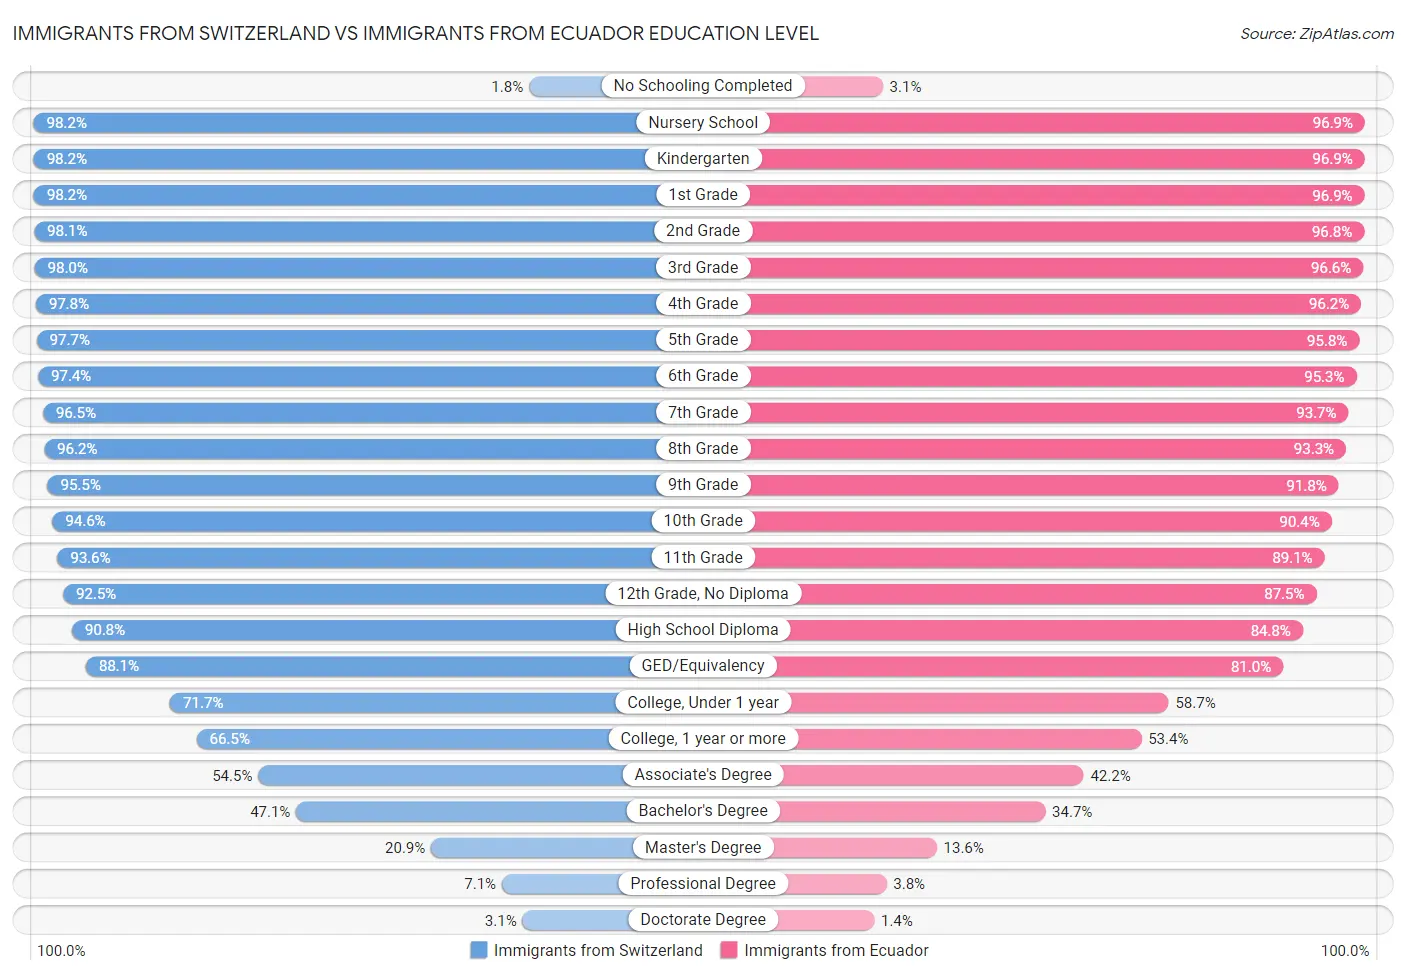 Immigrants from Switzerland vs Immigrants from Ecuador Education Level